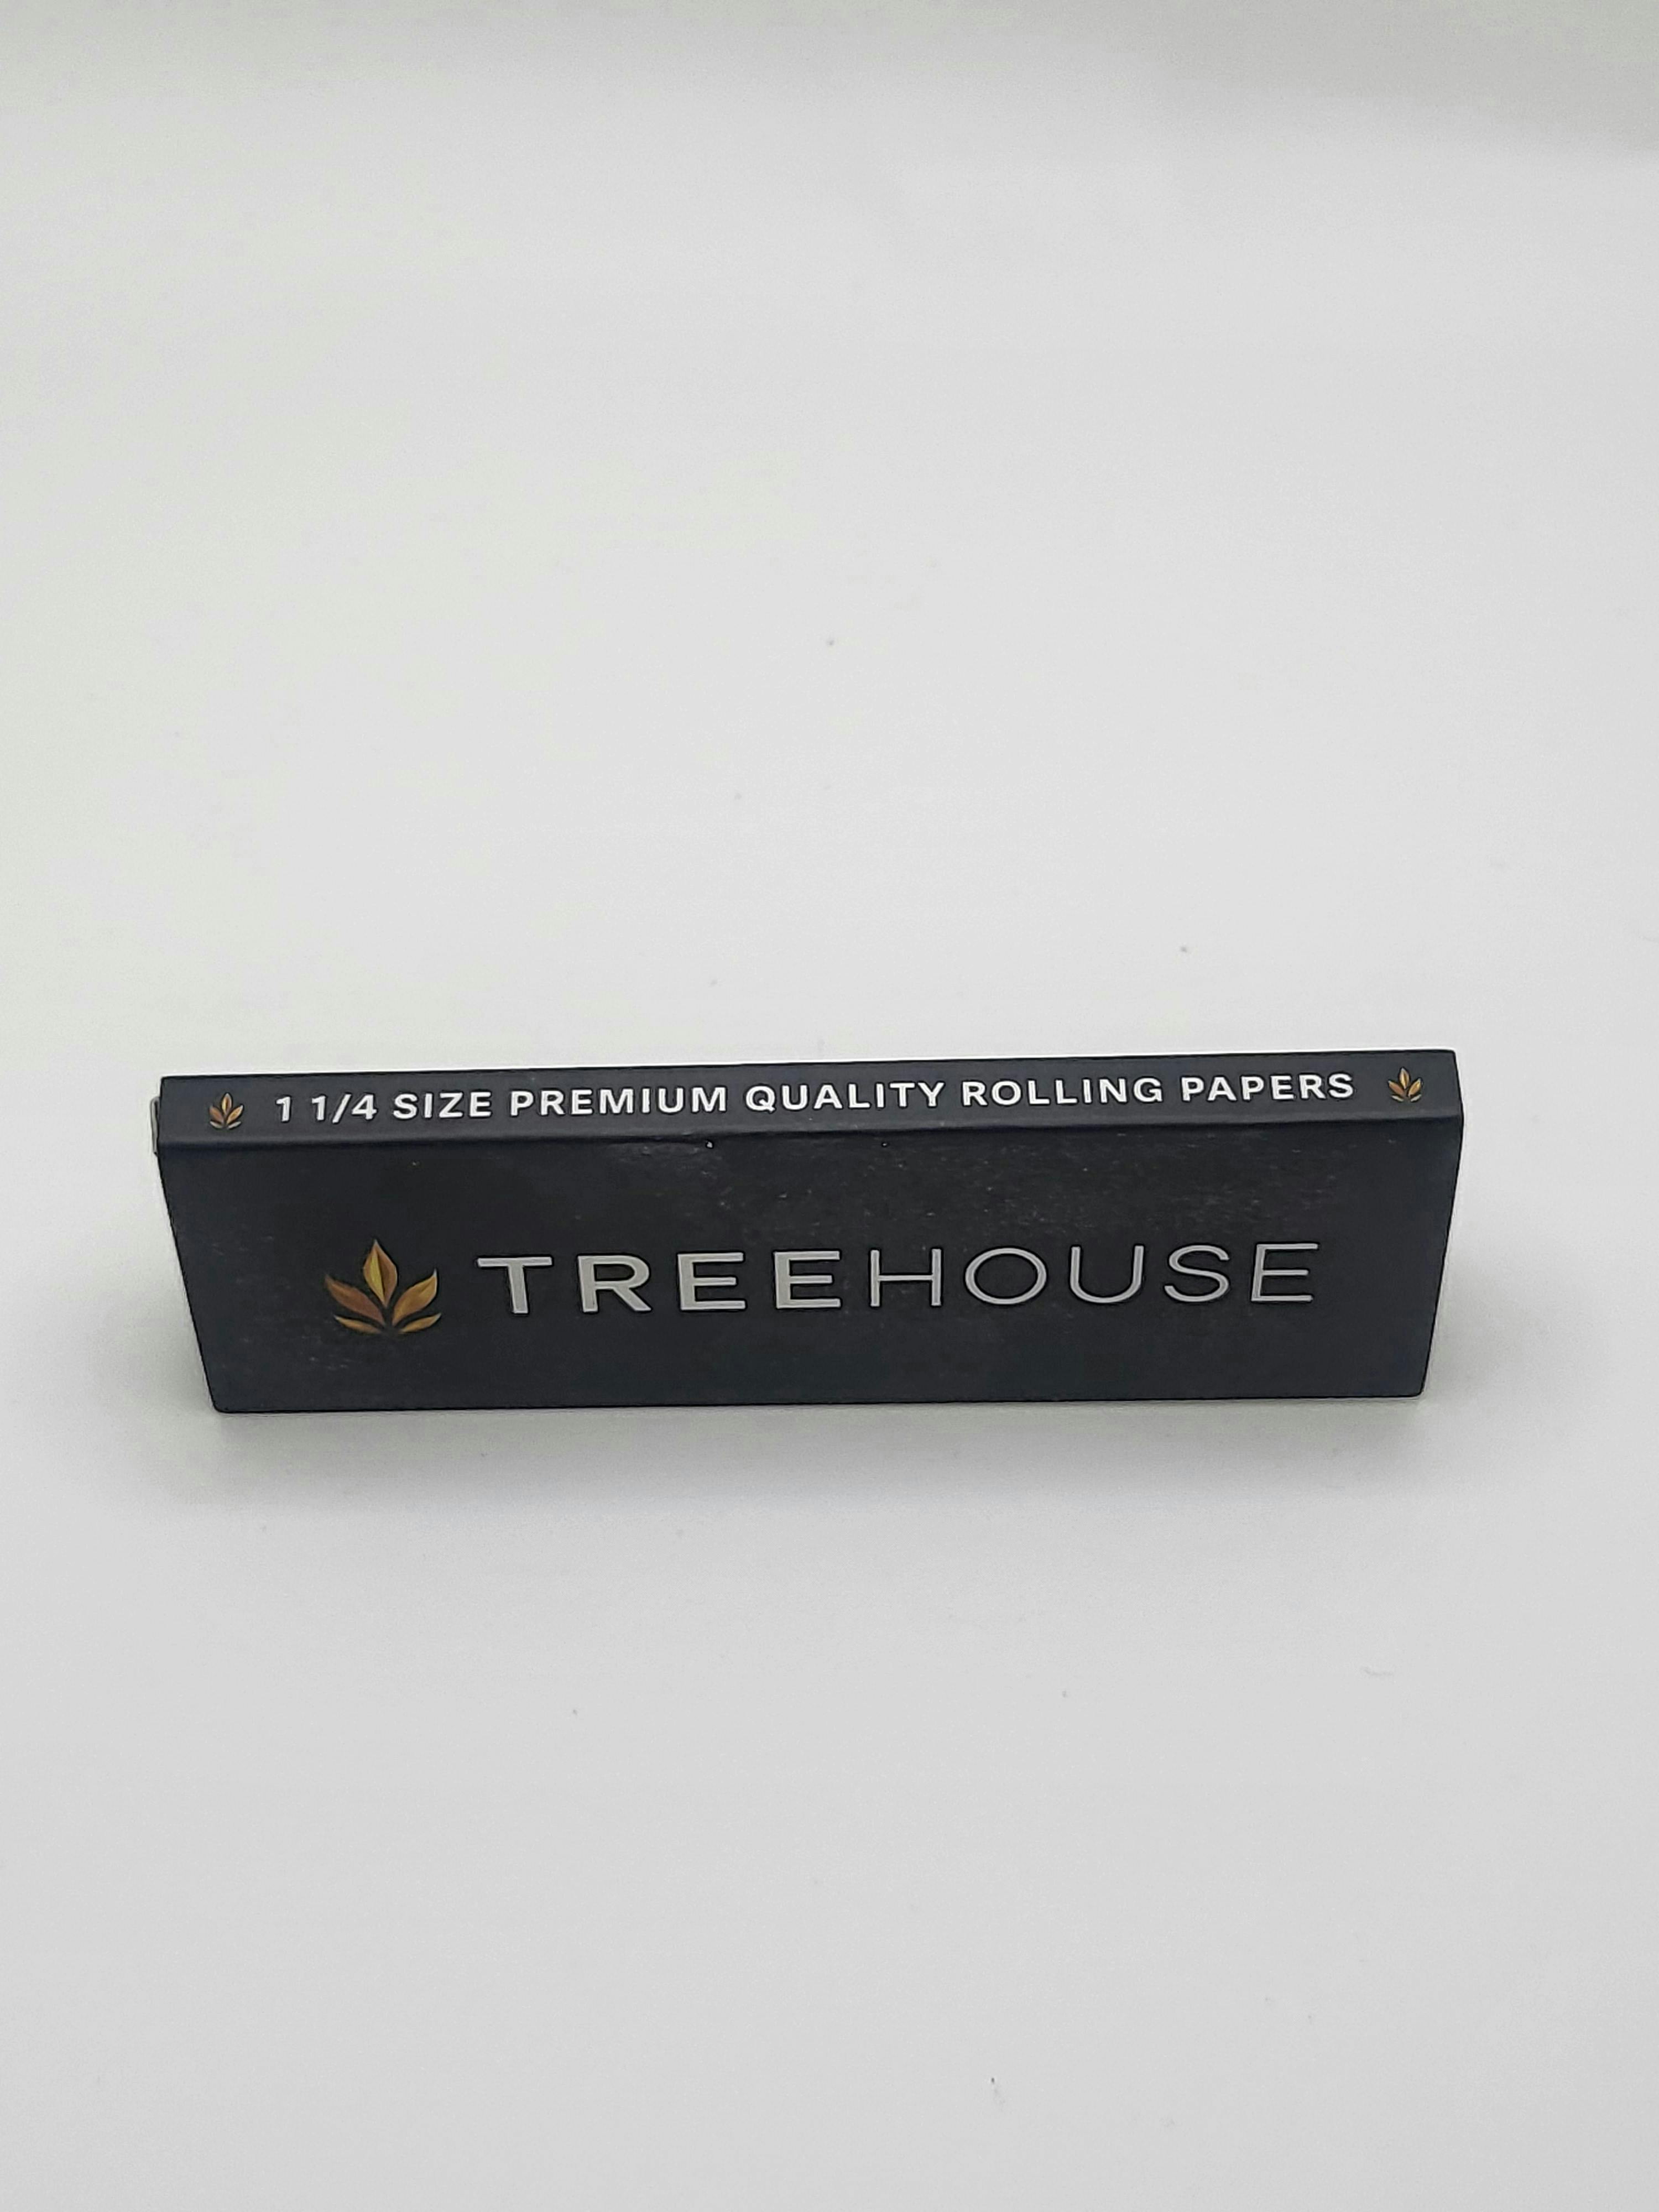 Treehouse Rolling Papers - Treehouse Cannabis - ACCESSORIES - Rockland County Weed Delivery | Treehouse Cannabis